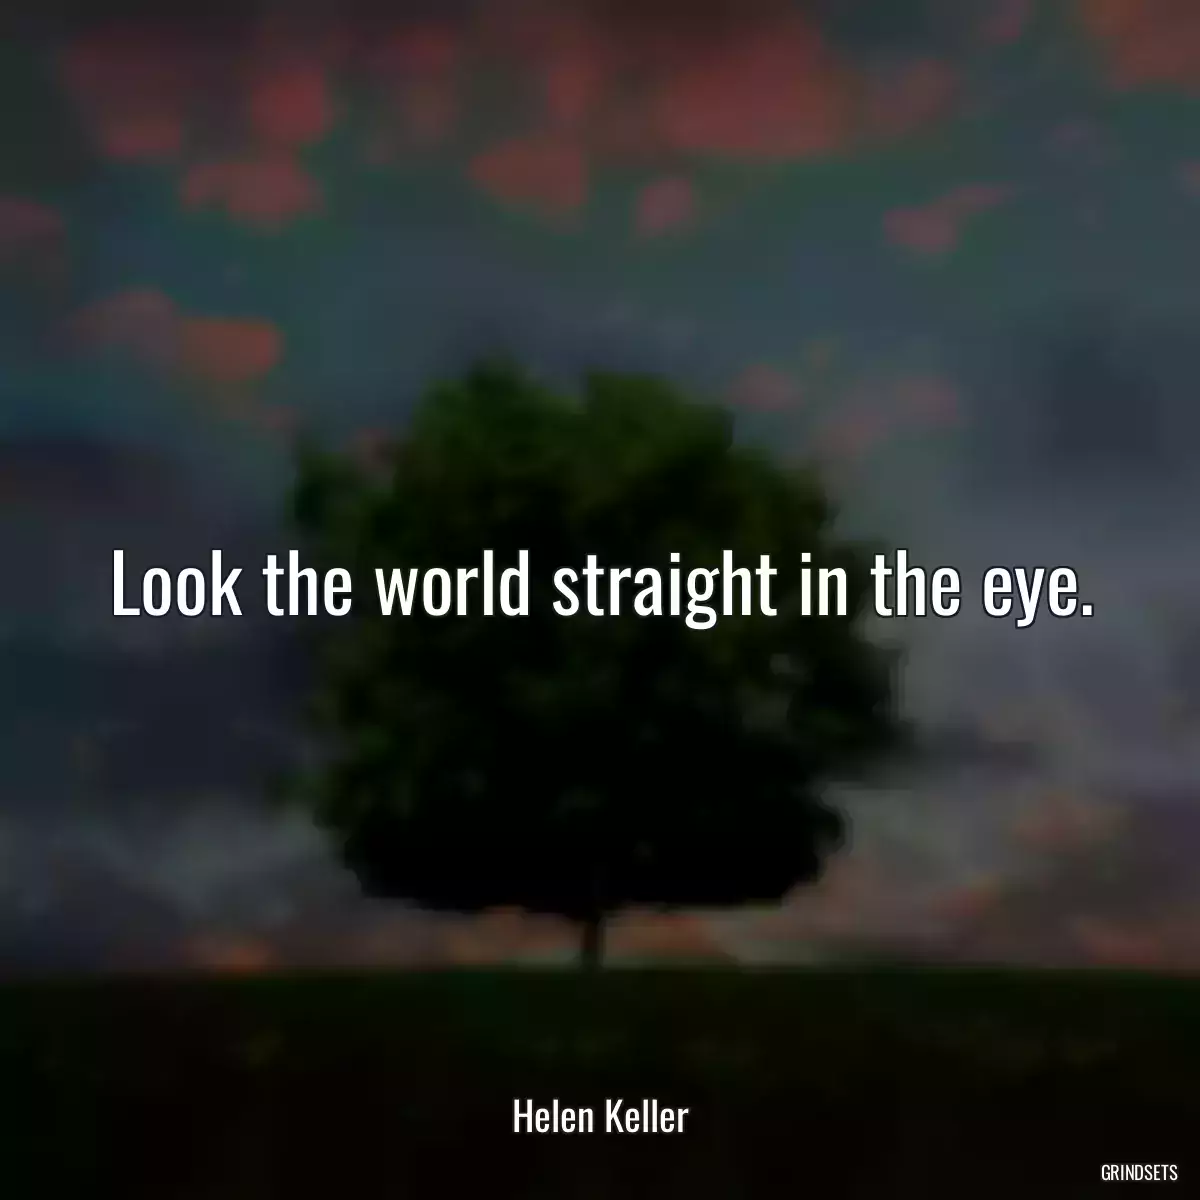 Look the world straight in the eye.